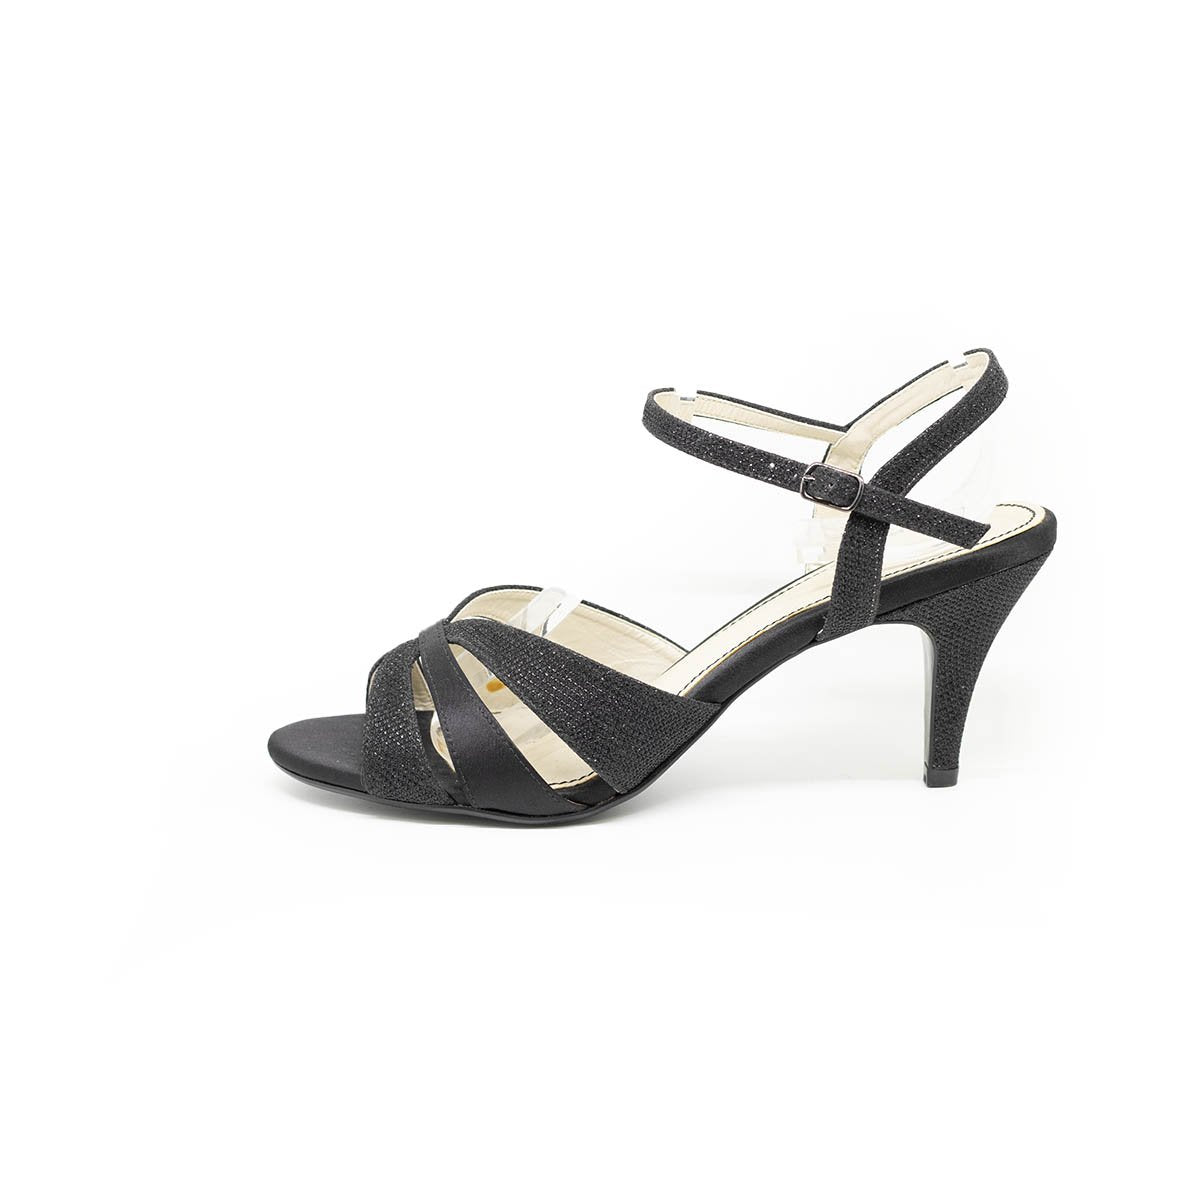 Clarice Rhonda RHONDA - Clearance Shoes Black / 10 / 41  Available at Illusions Lingerie